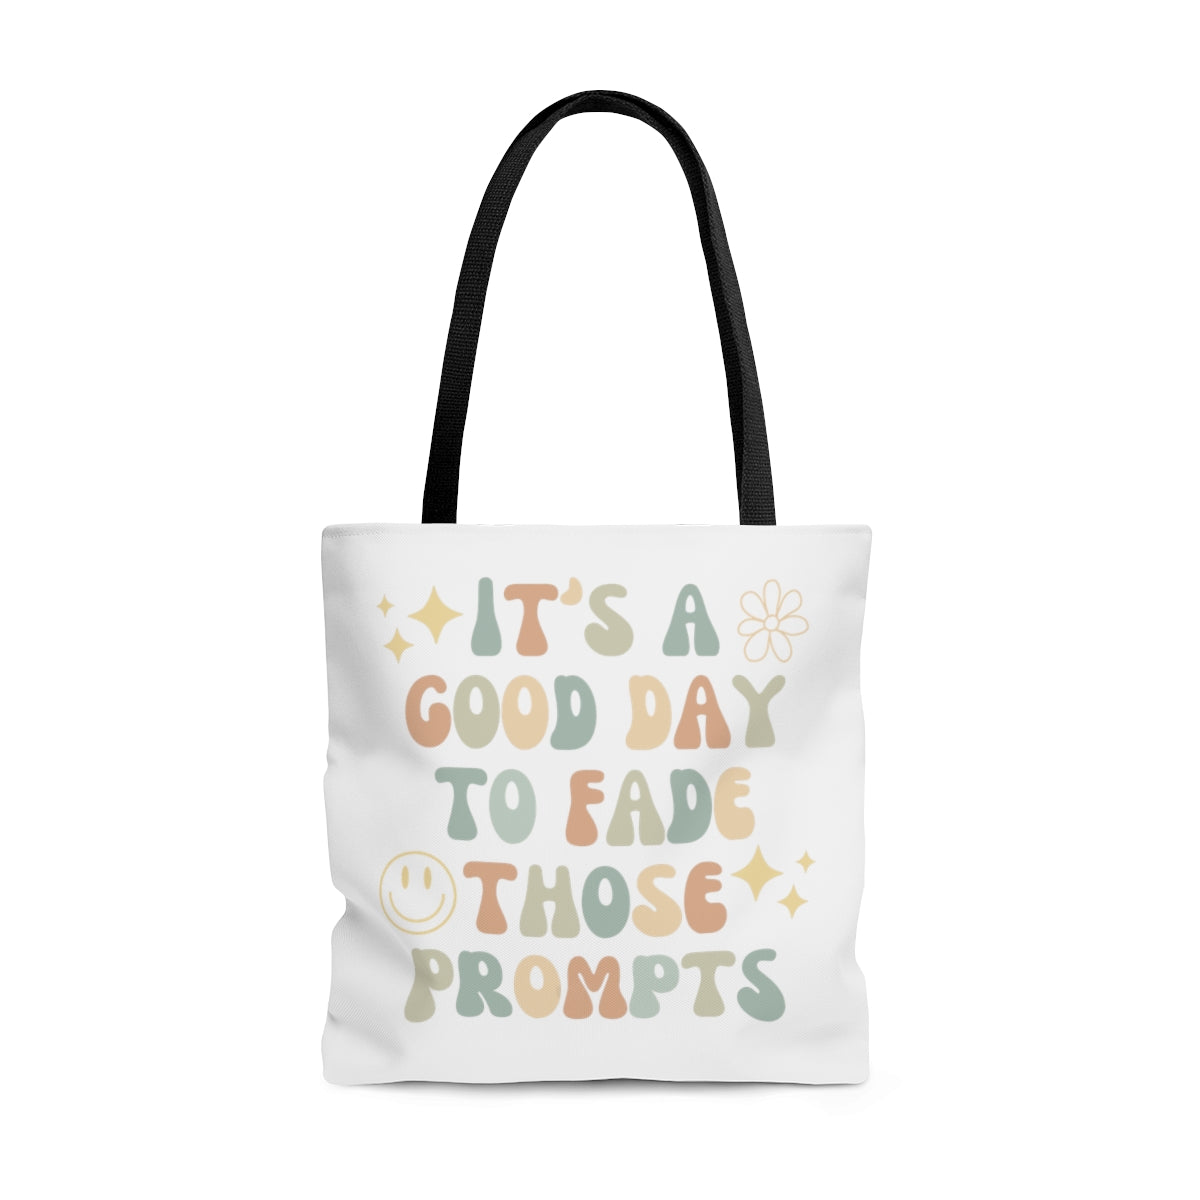 Good Day to Fade Those Prompts Tote Bag | Teacher Tote Bag | Therapist Tote Bag | Behavior analysis tote bag | Behavior Analyst